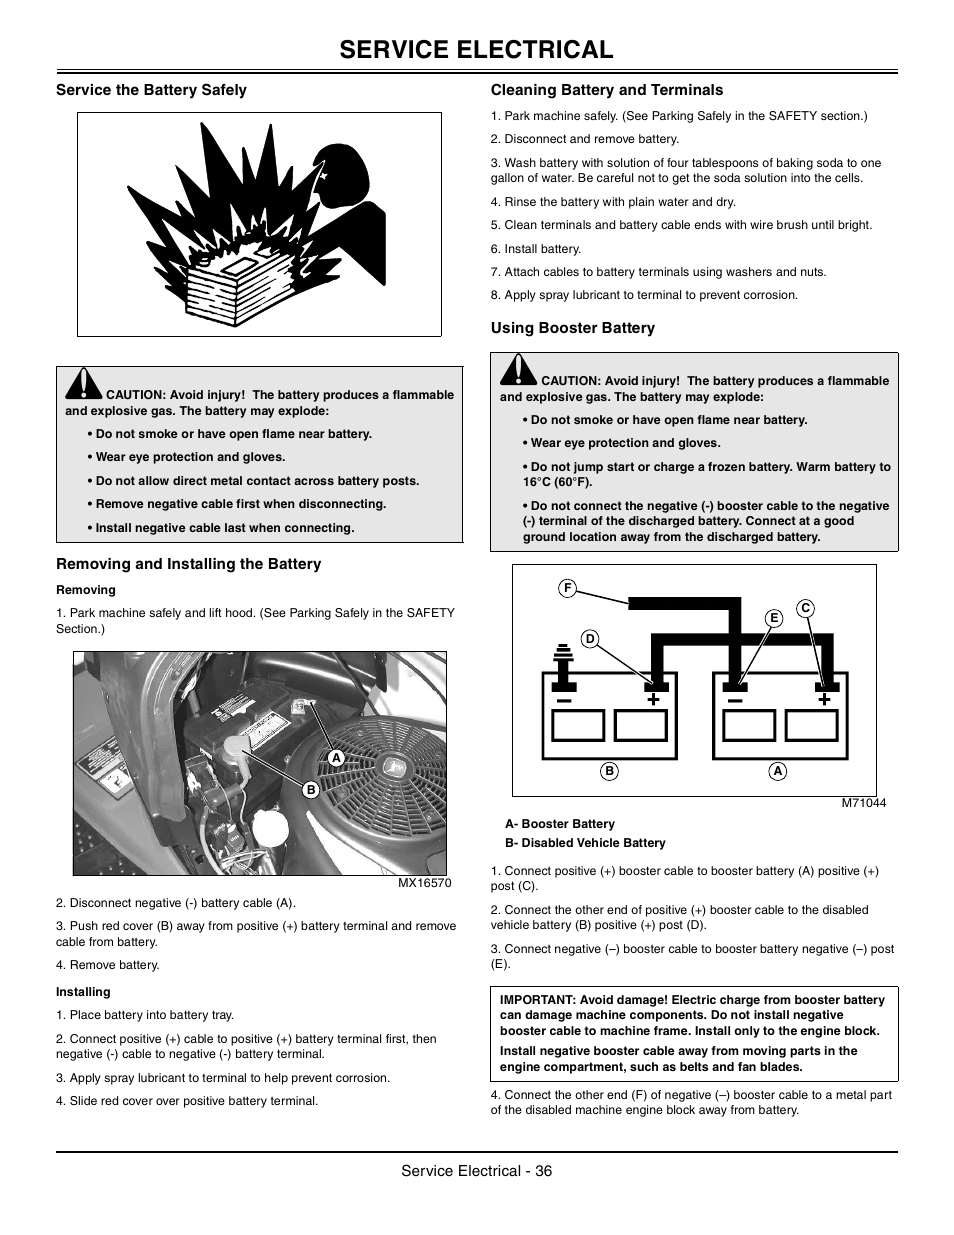 Service the battery safely, Removing and installing the battery, Removing | Installing, Cleaning battery and terminals, Using booster battery, Service electrical | John Deere la105 User Manual | Page 37 / 52